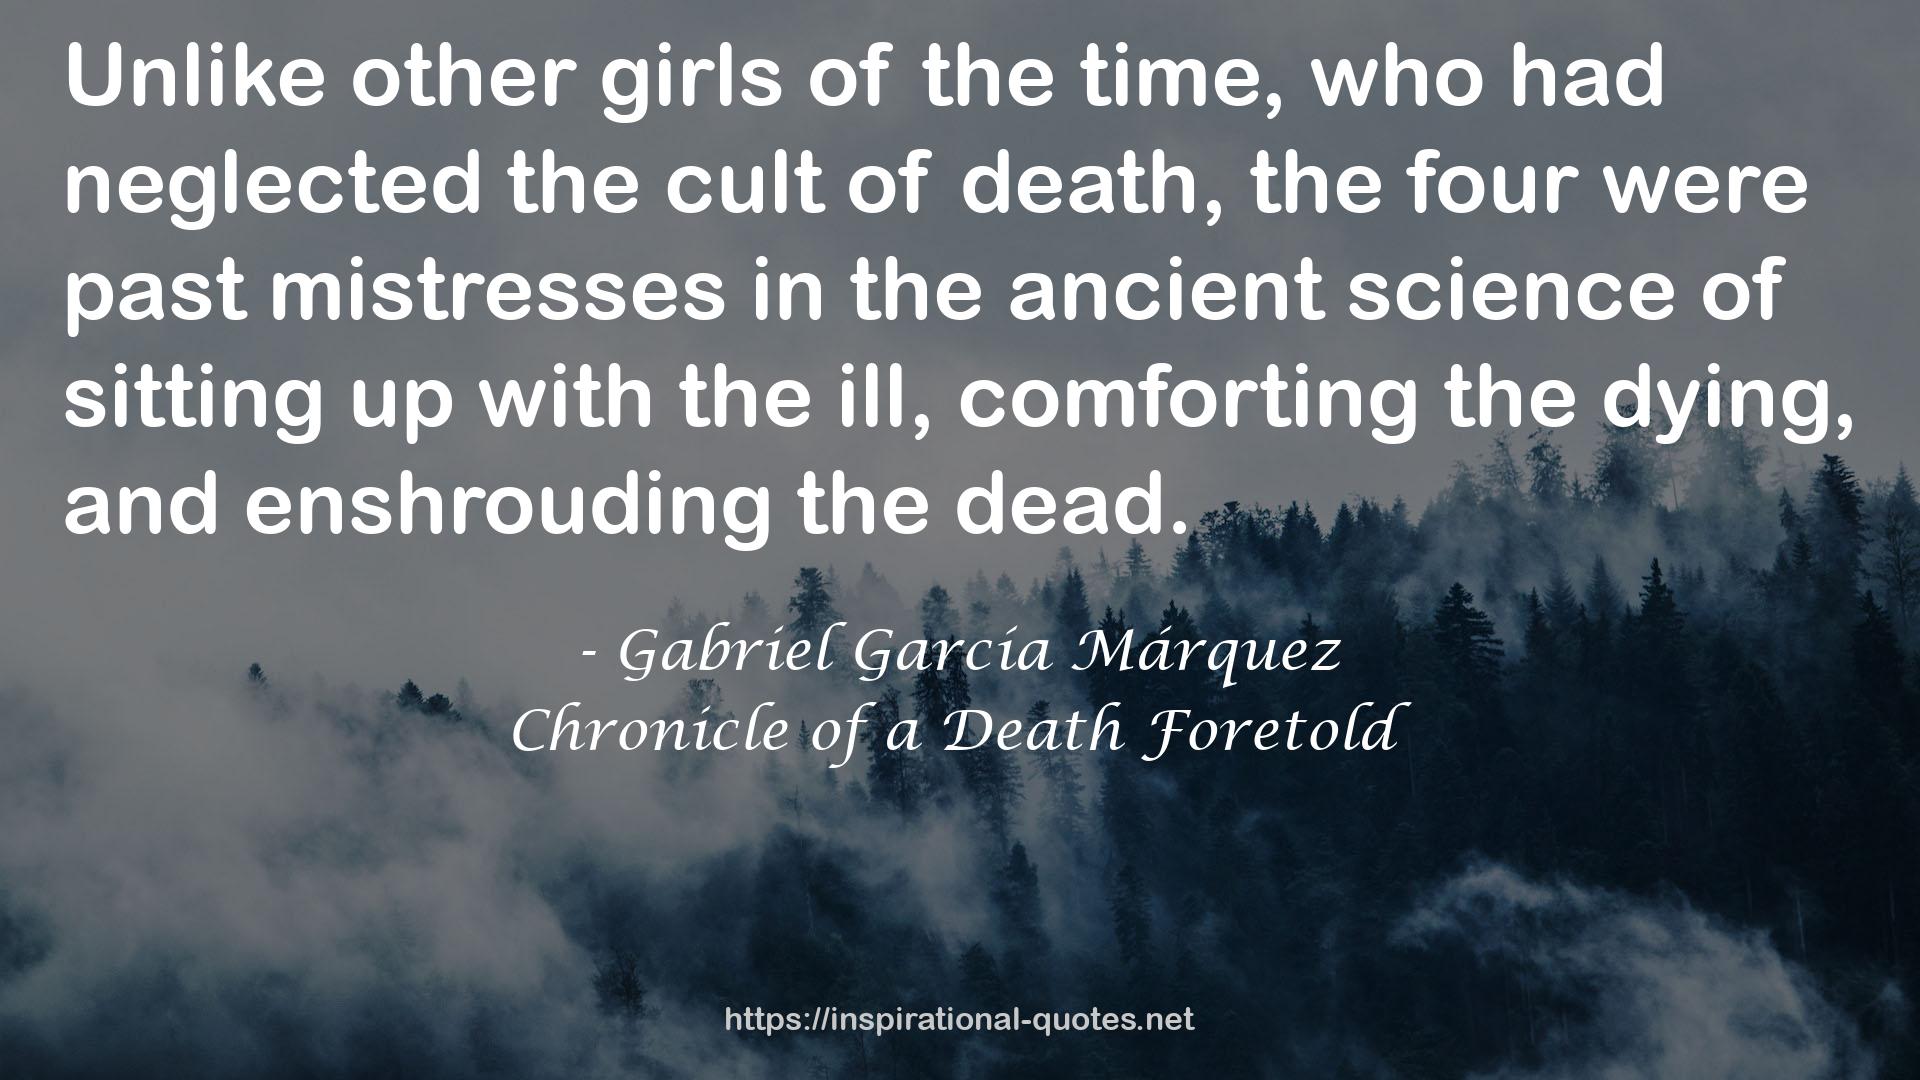 Chronicle of a Death Foretold QUOTES